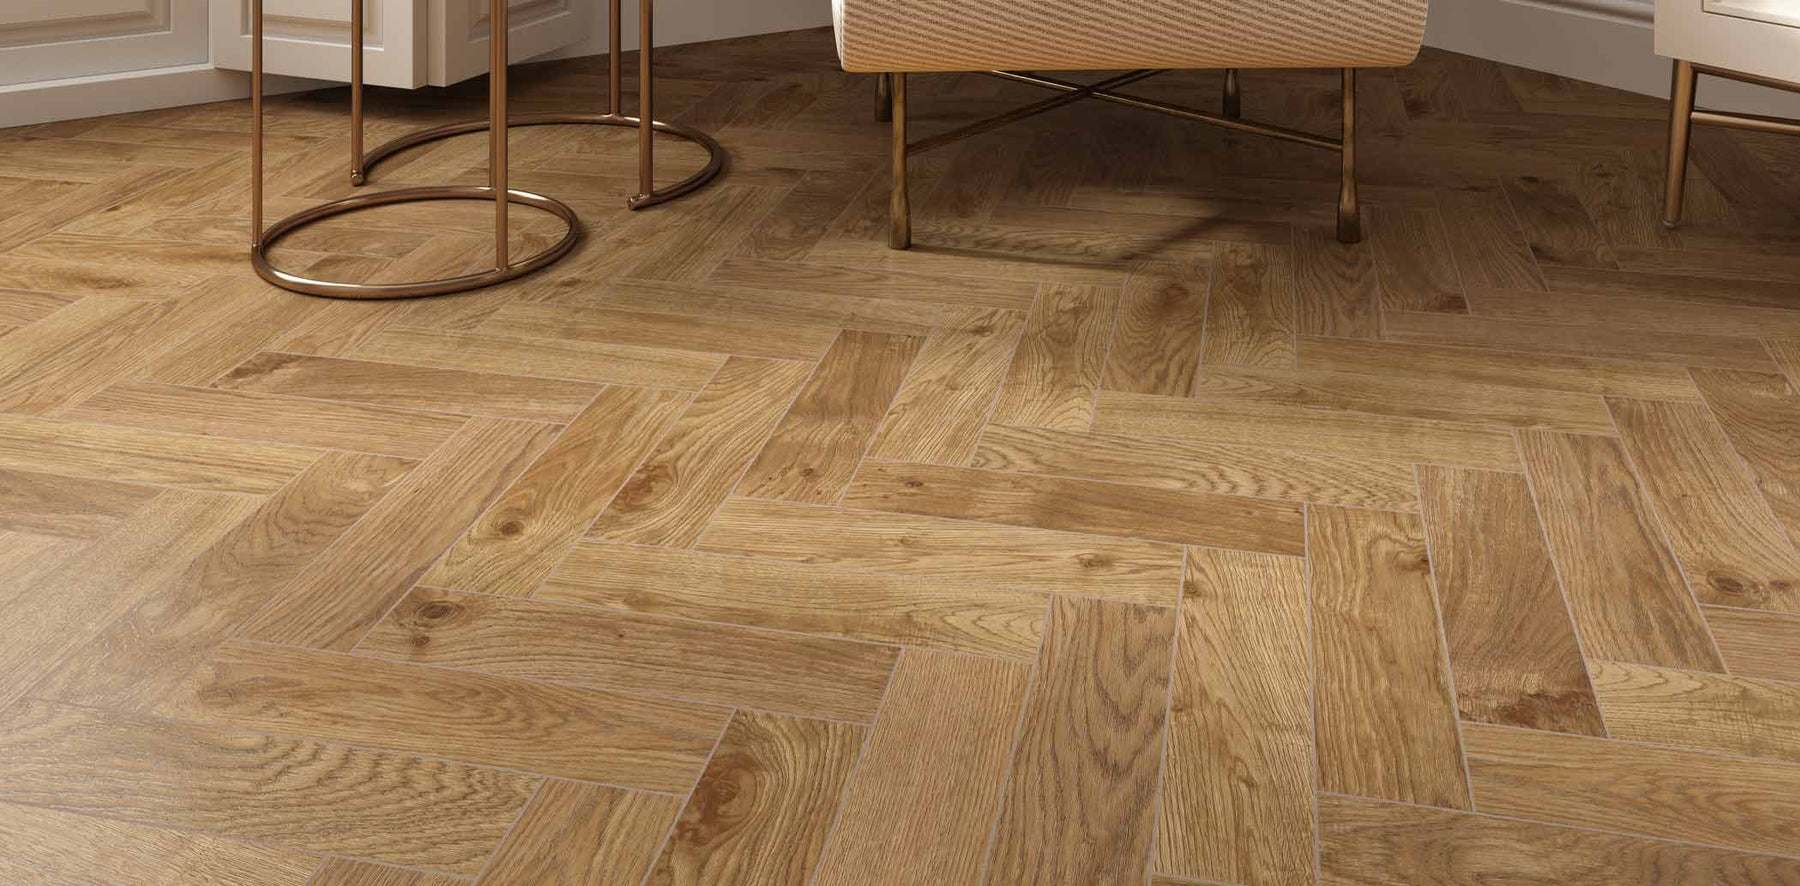 Exploring Herringbone vs Parquet: What's the Difference?